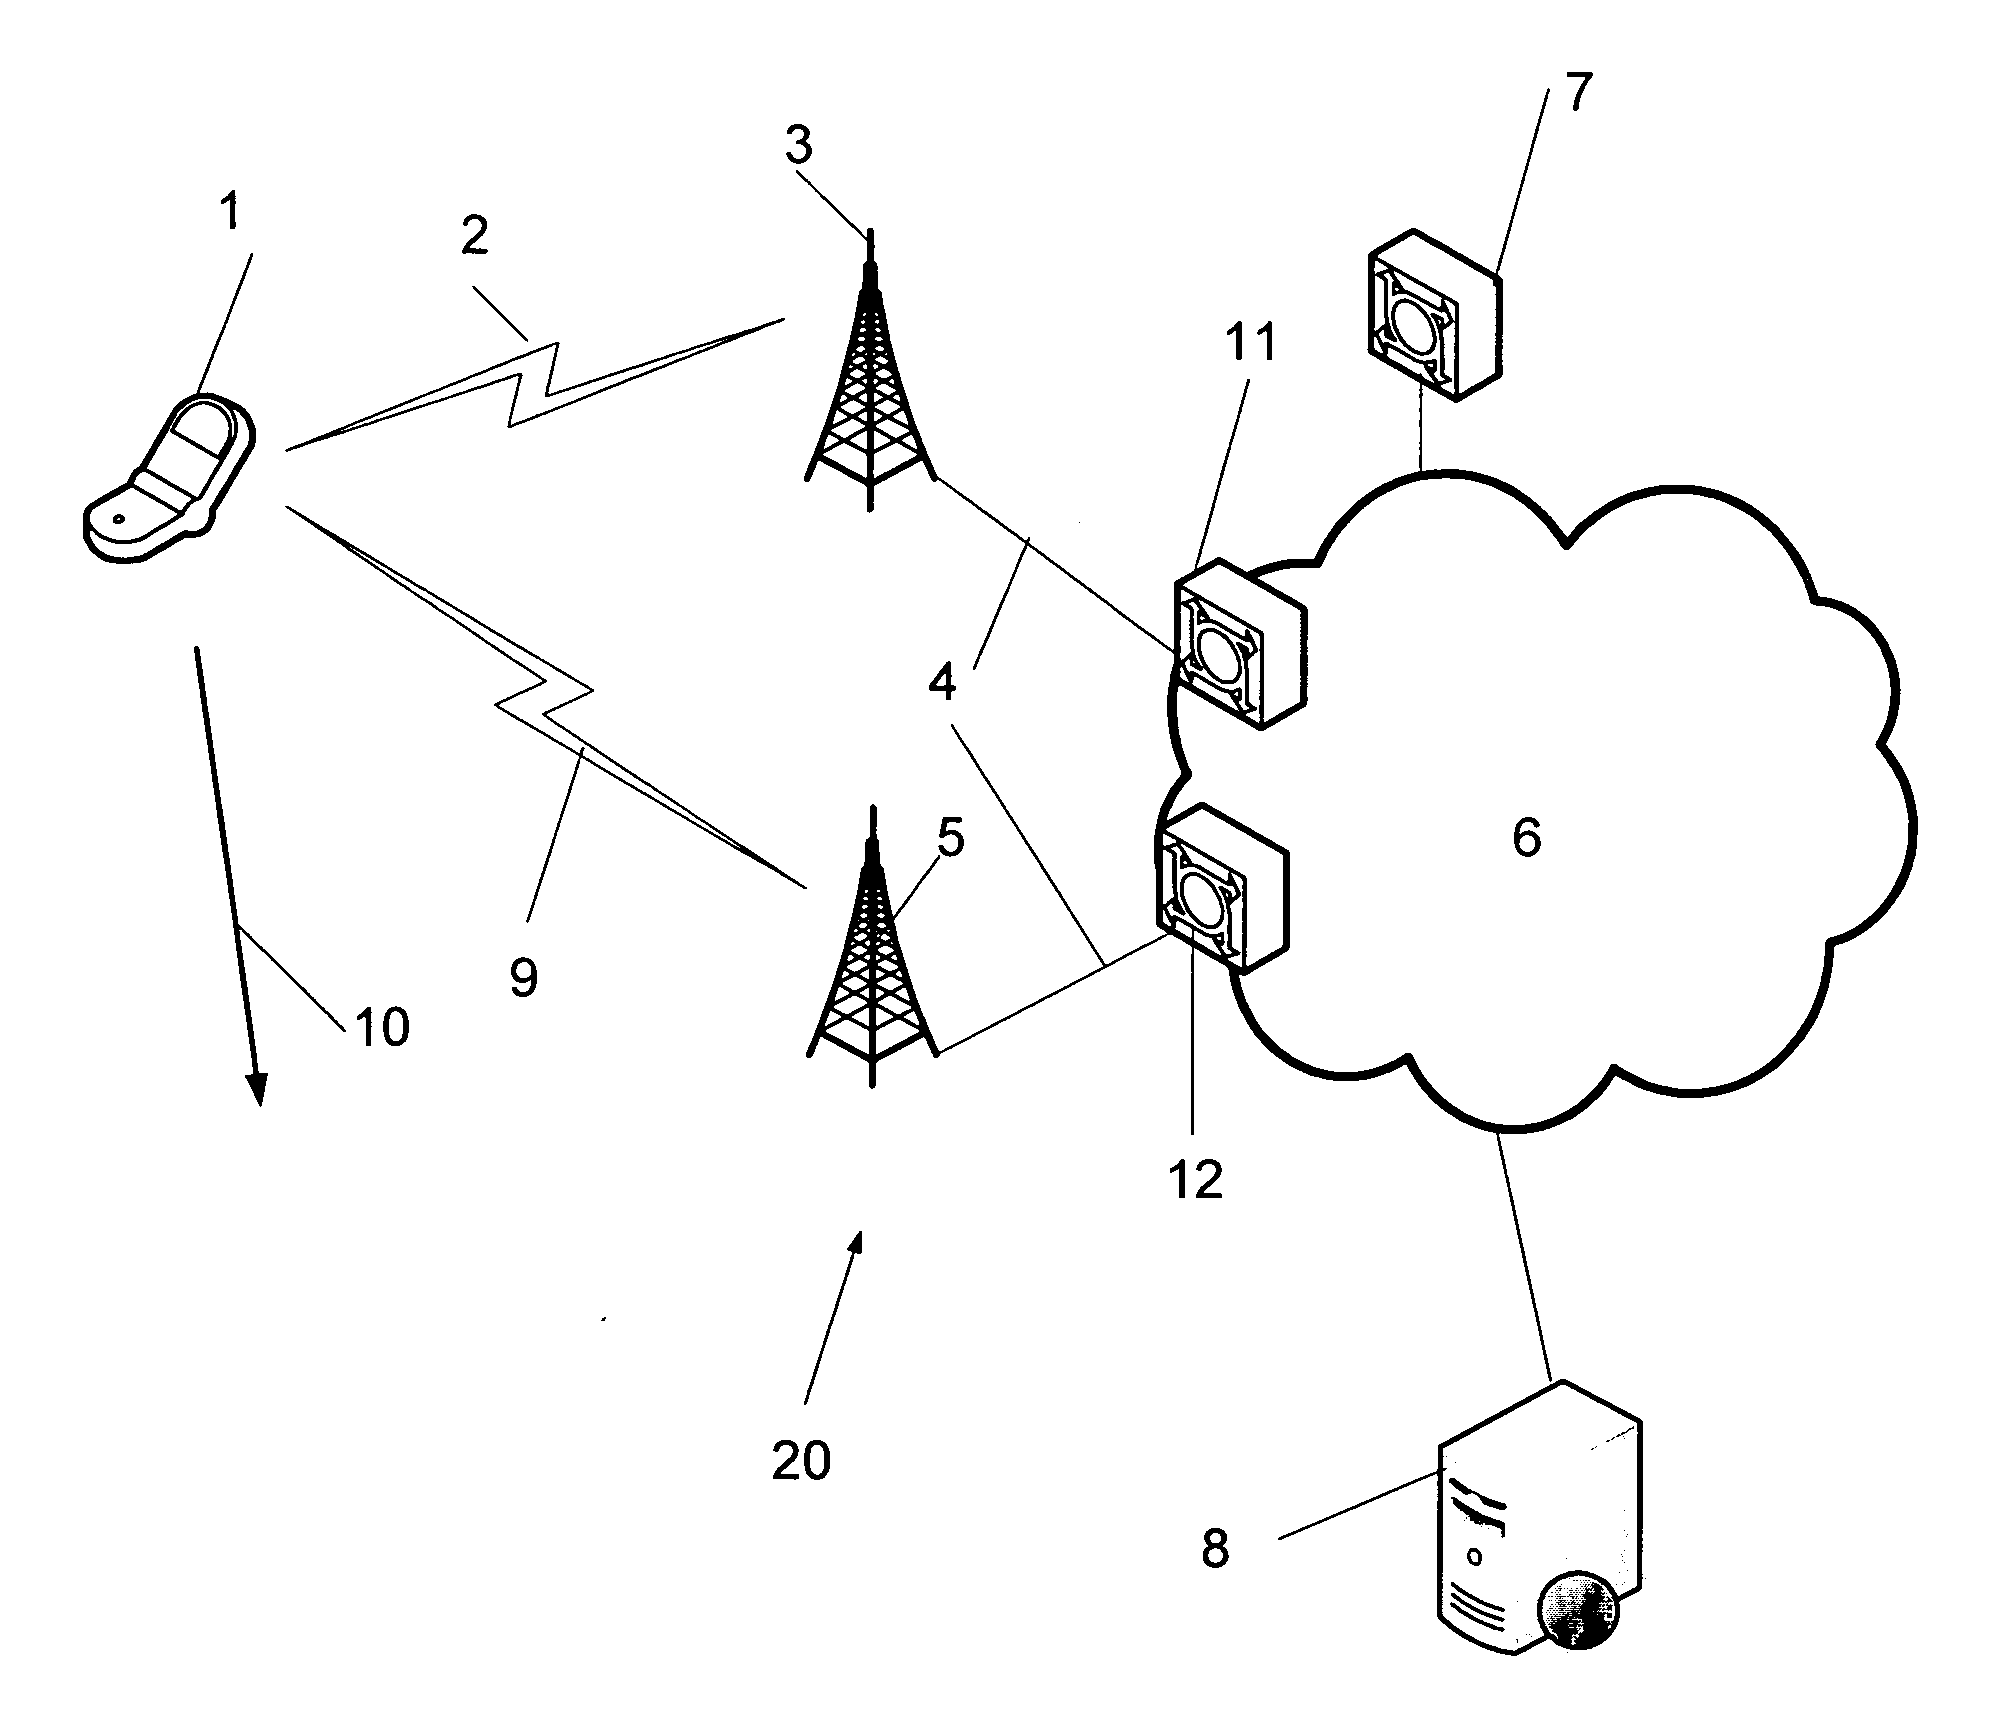 Topology Hiding Of Mobile Agents